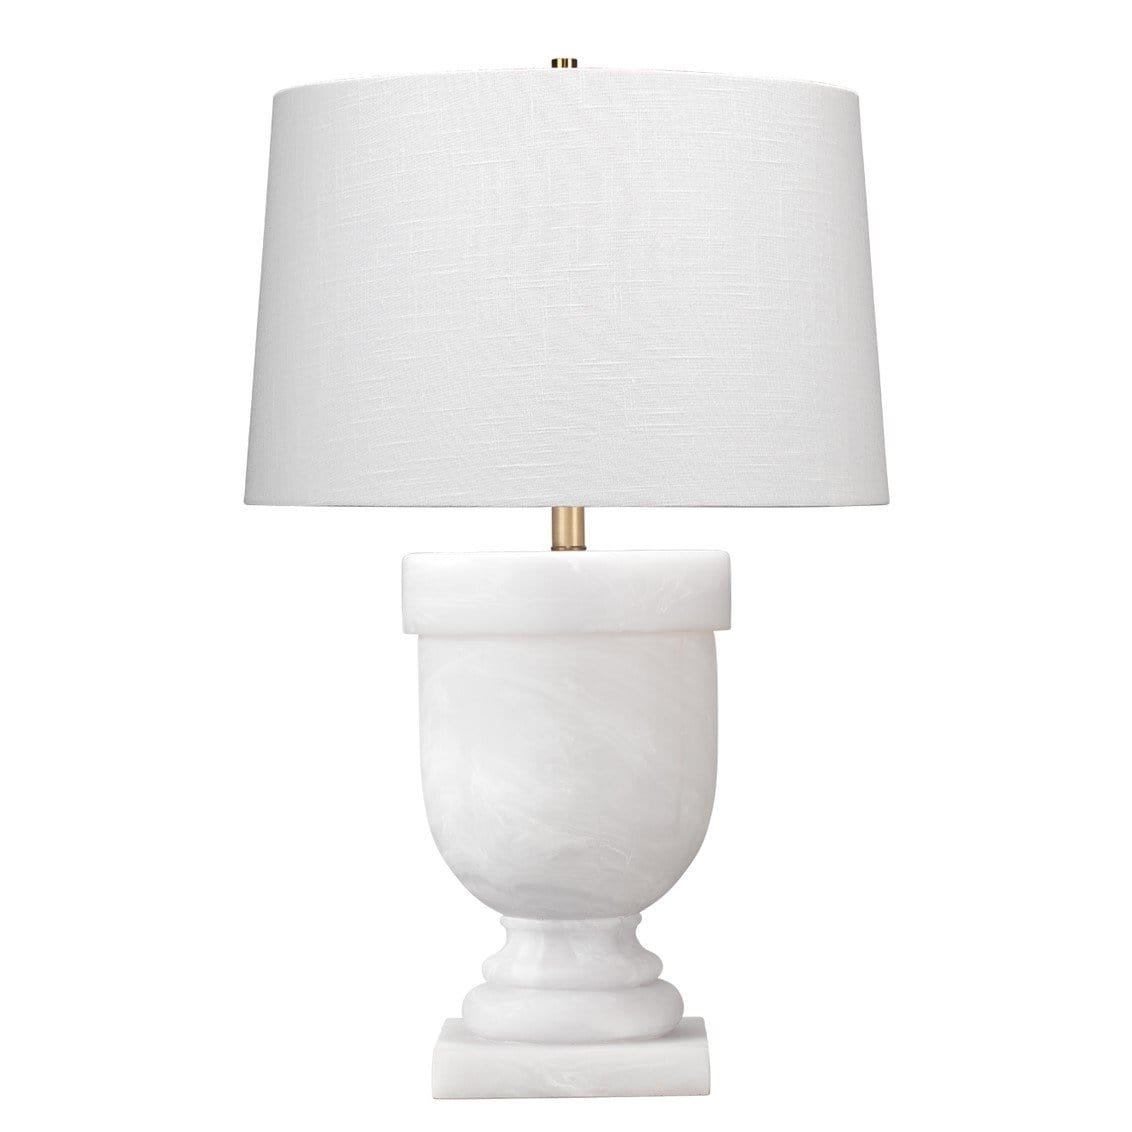 Jamie Young Co. Carnegie Table Lamp Lighting JAMIE-YOUNG-CO-9CARNEGIEWH 688933031607